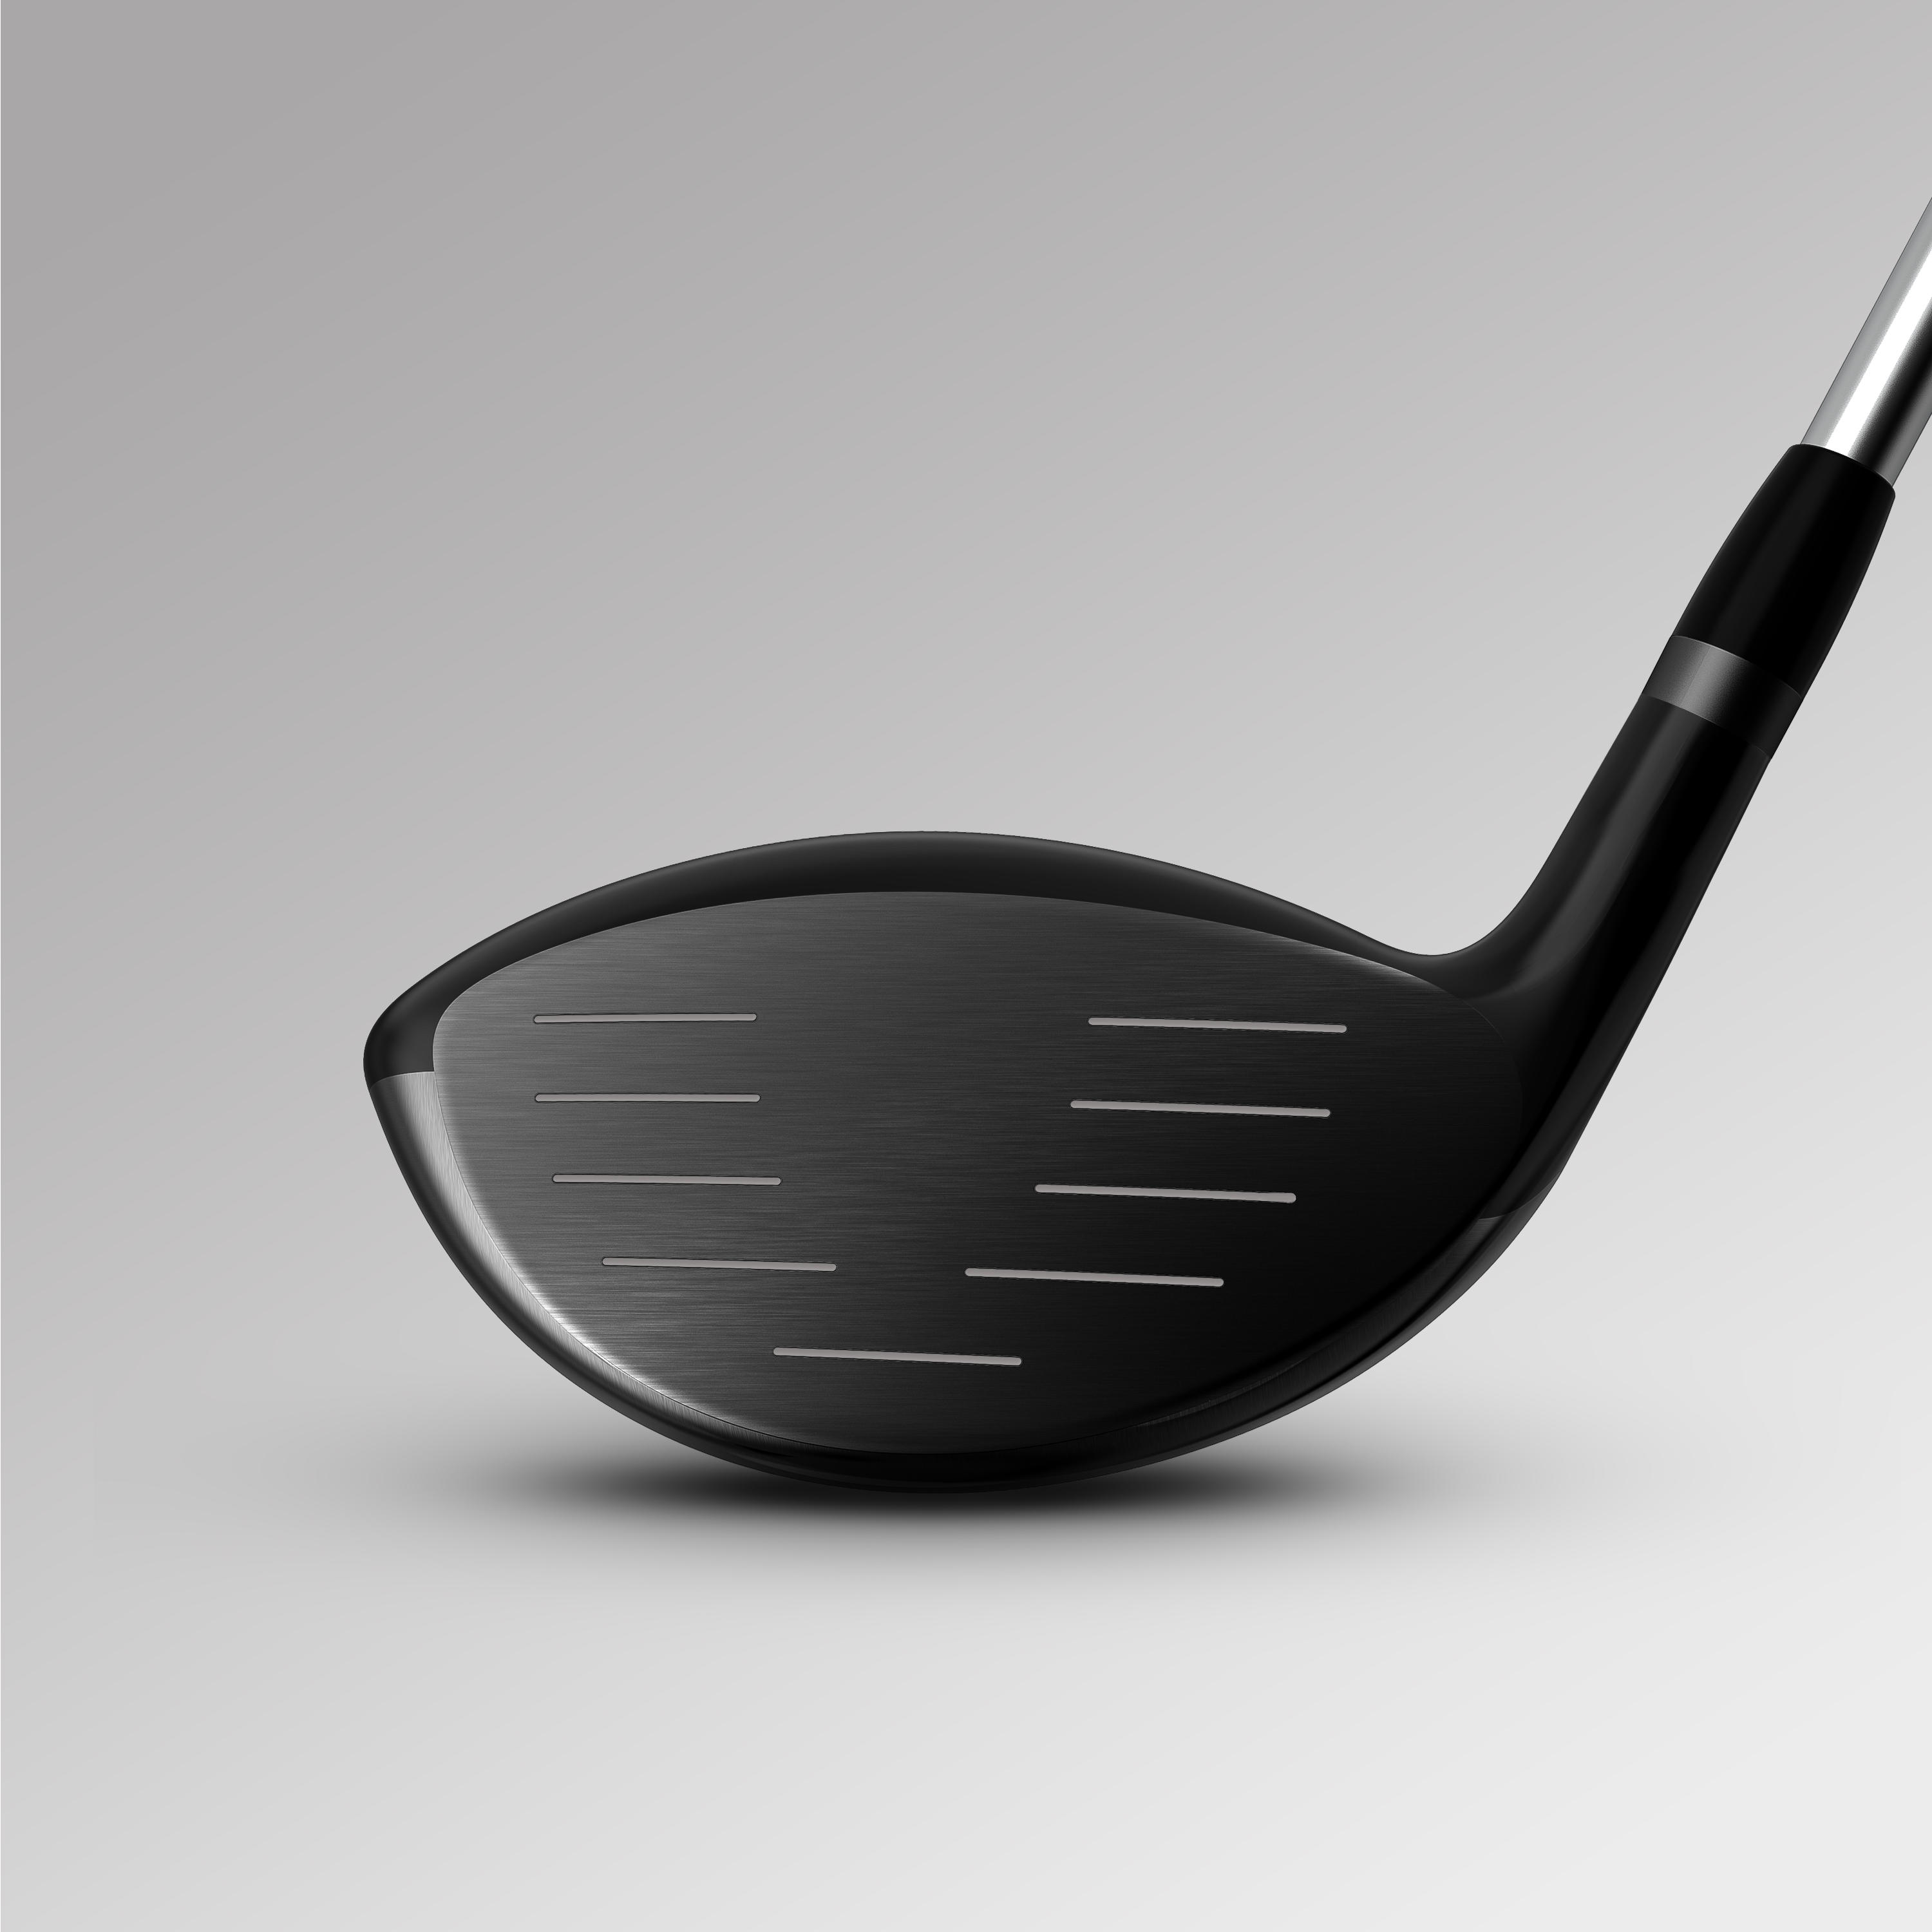 Golf driver right-handed size 2 high speed - INESIS 500 3/9